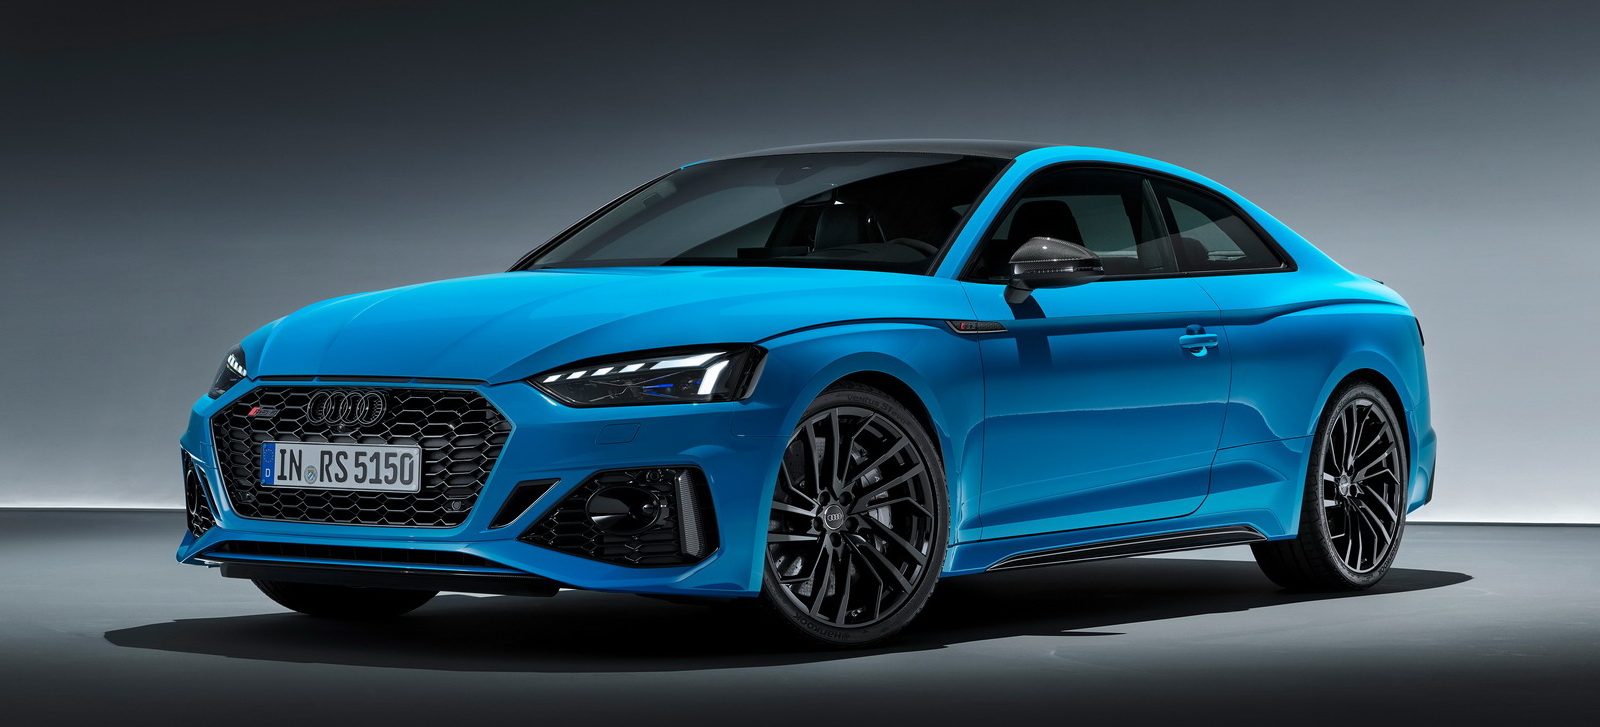 2020 Audi Rs5 Coupe And Sportback Gain Revised Exteriors And